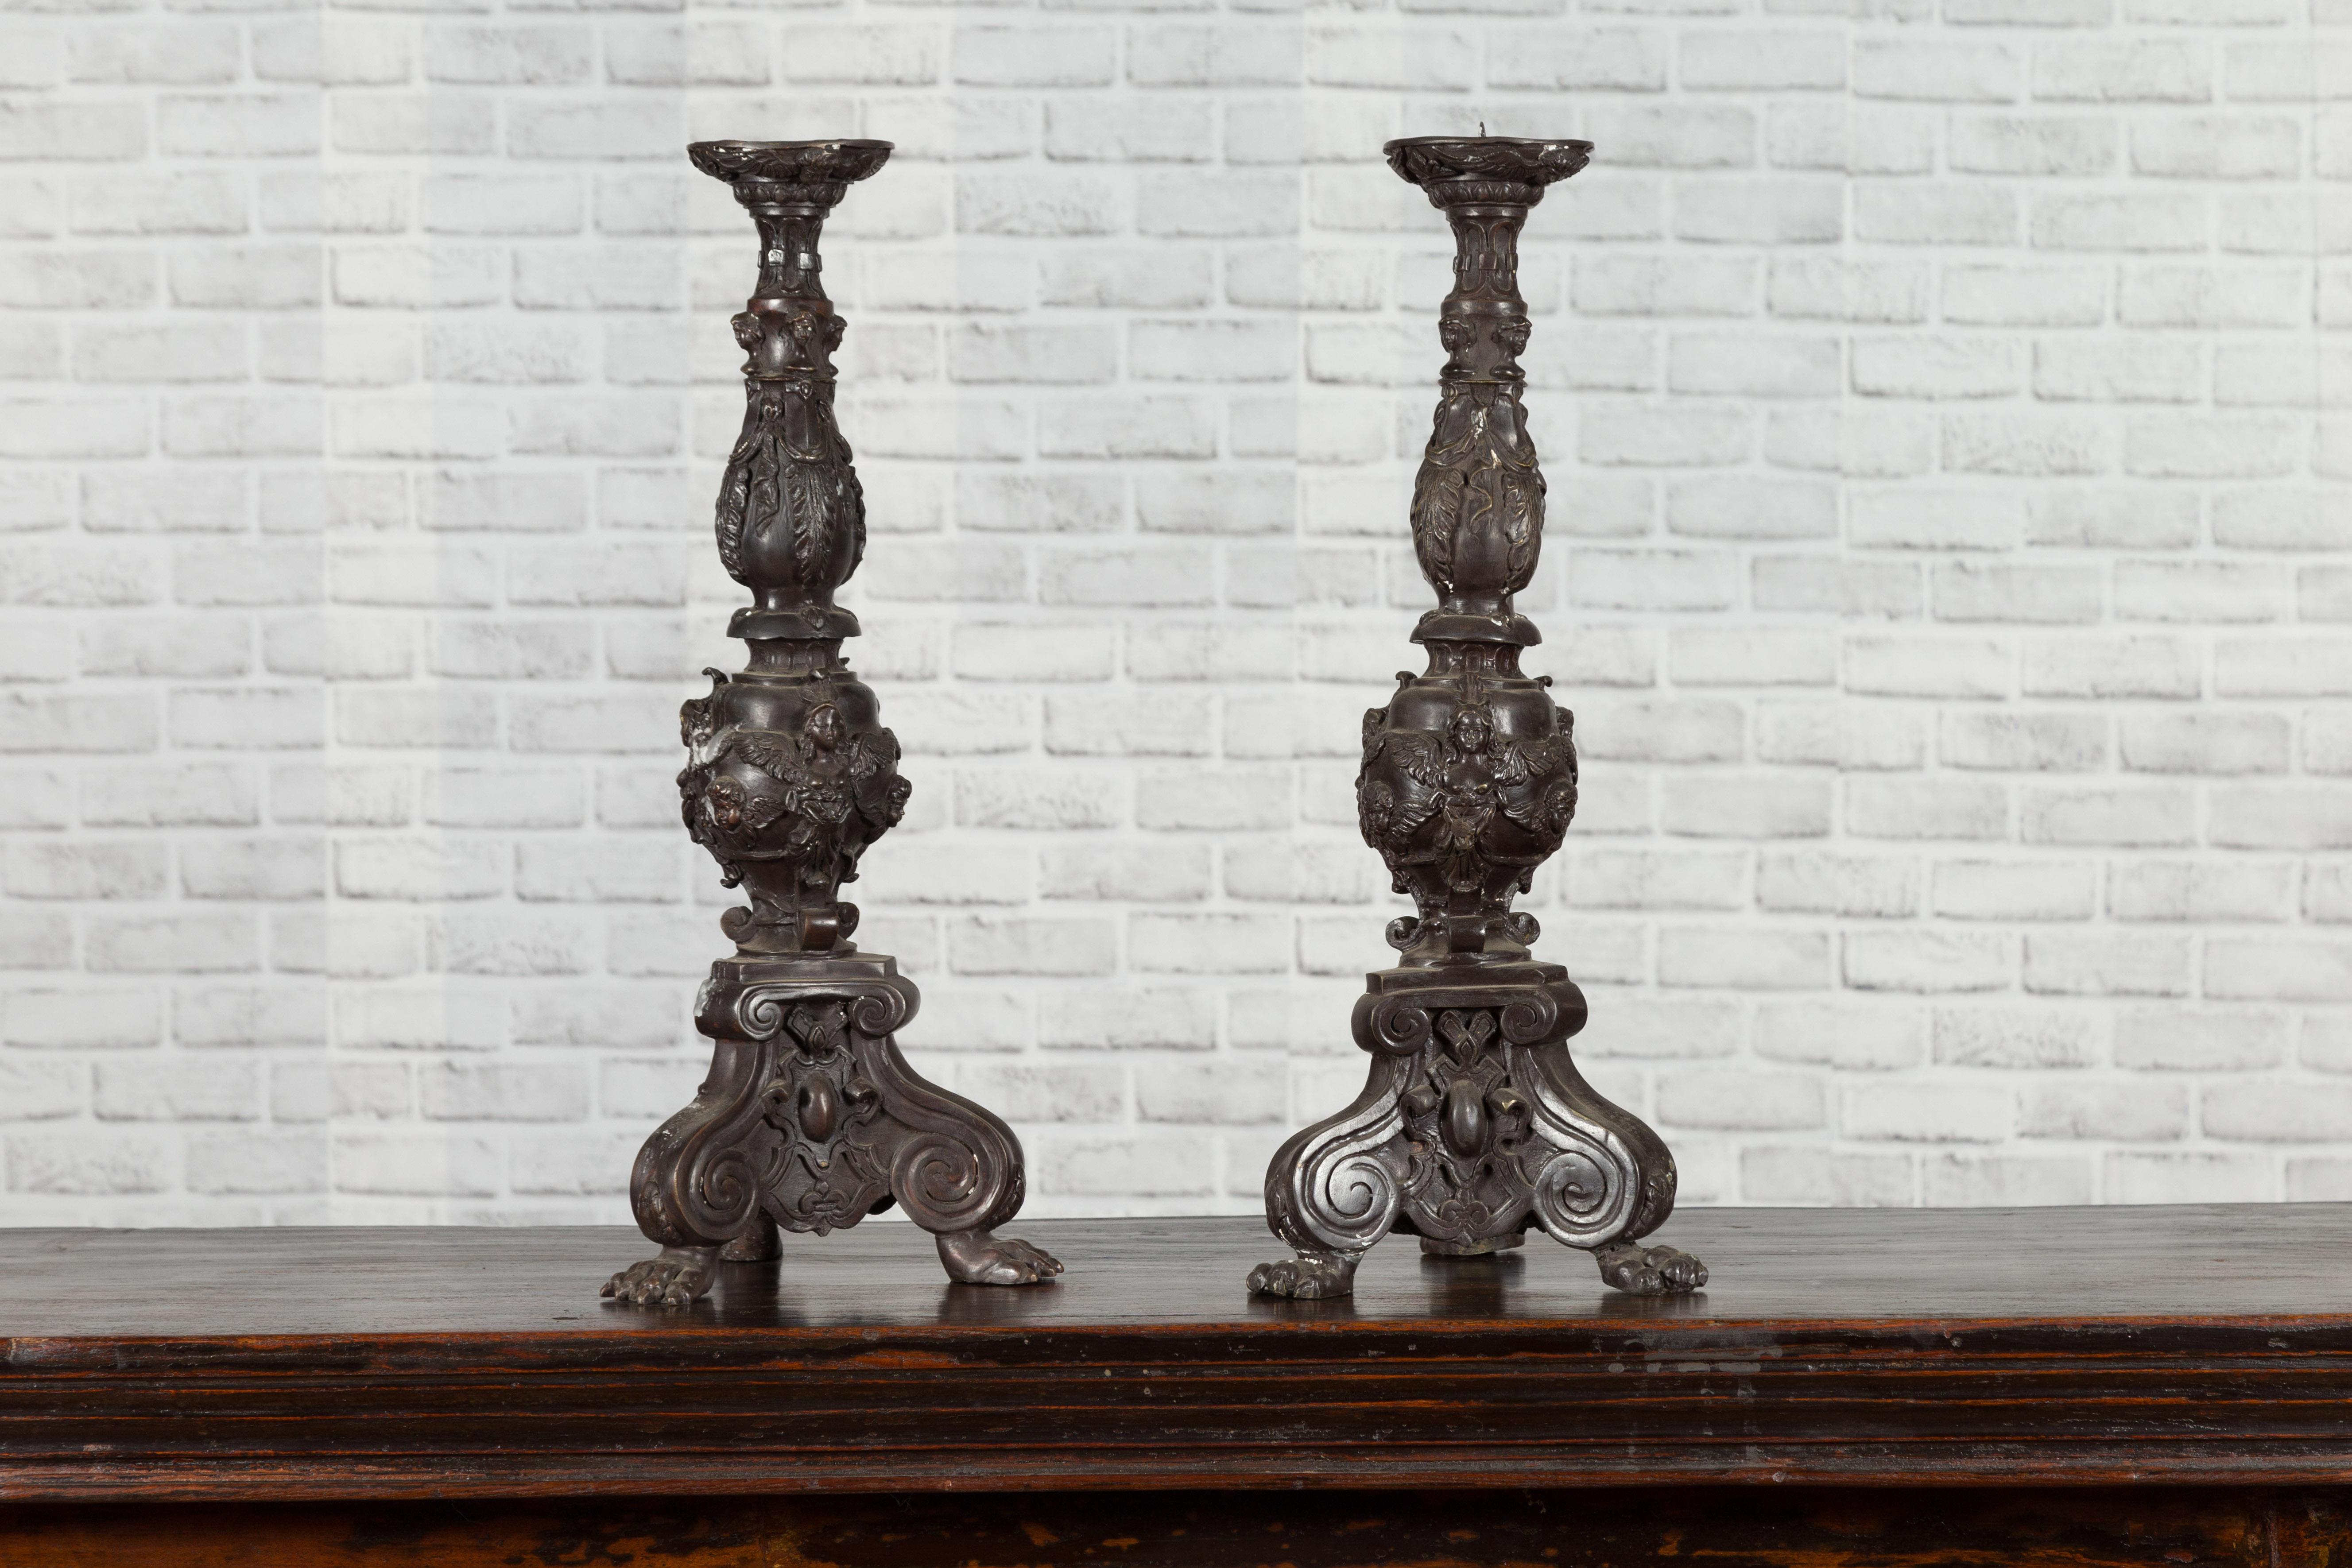 A pair of vintage Baroque style cast bronze candlesticks from the mid-20th century, with cherubs, tripod bases and lion paw feet. Created with the traditional technique of the lost-wax (à la cire perdue) that allows a great precision and finesse in